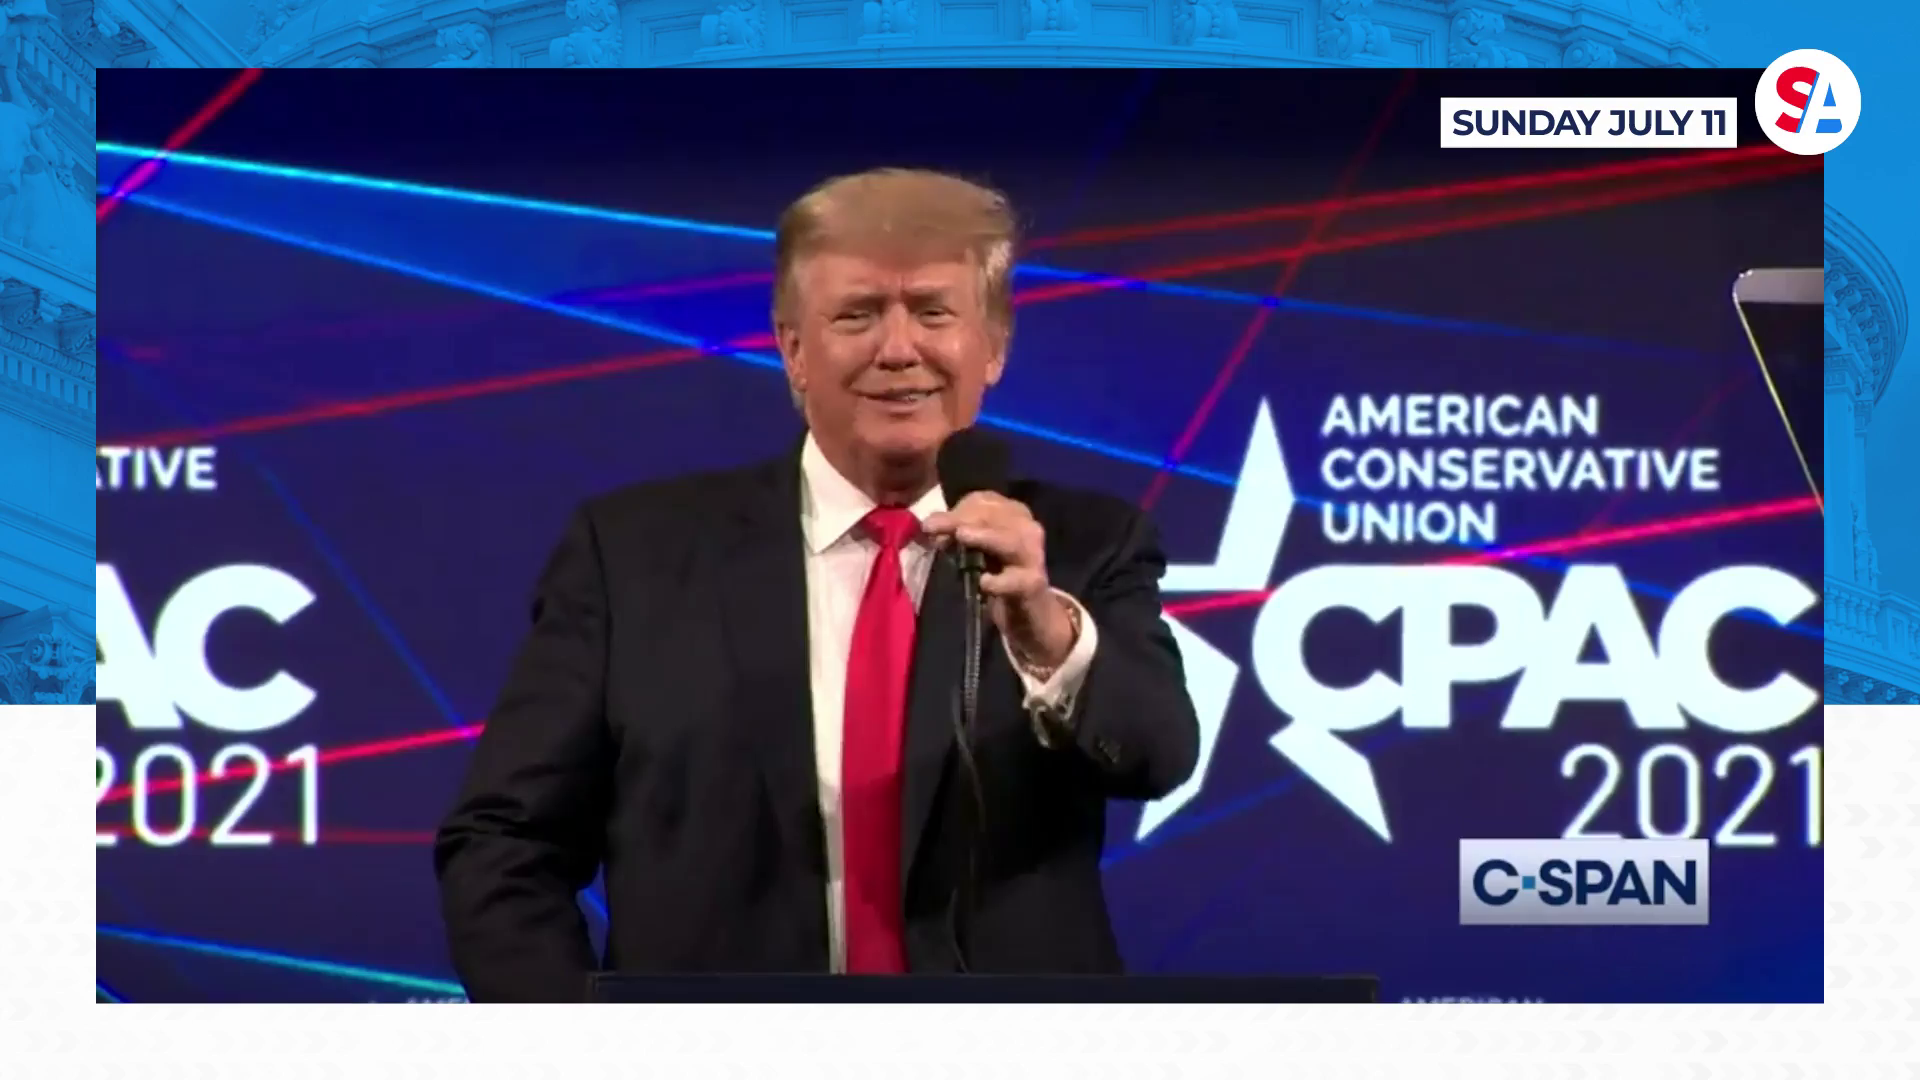 Trump CPAC Straw Poll Reelection